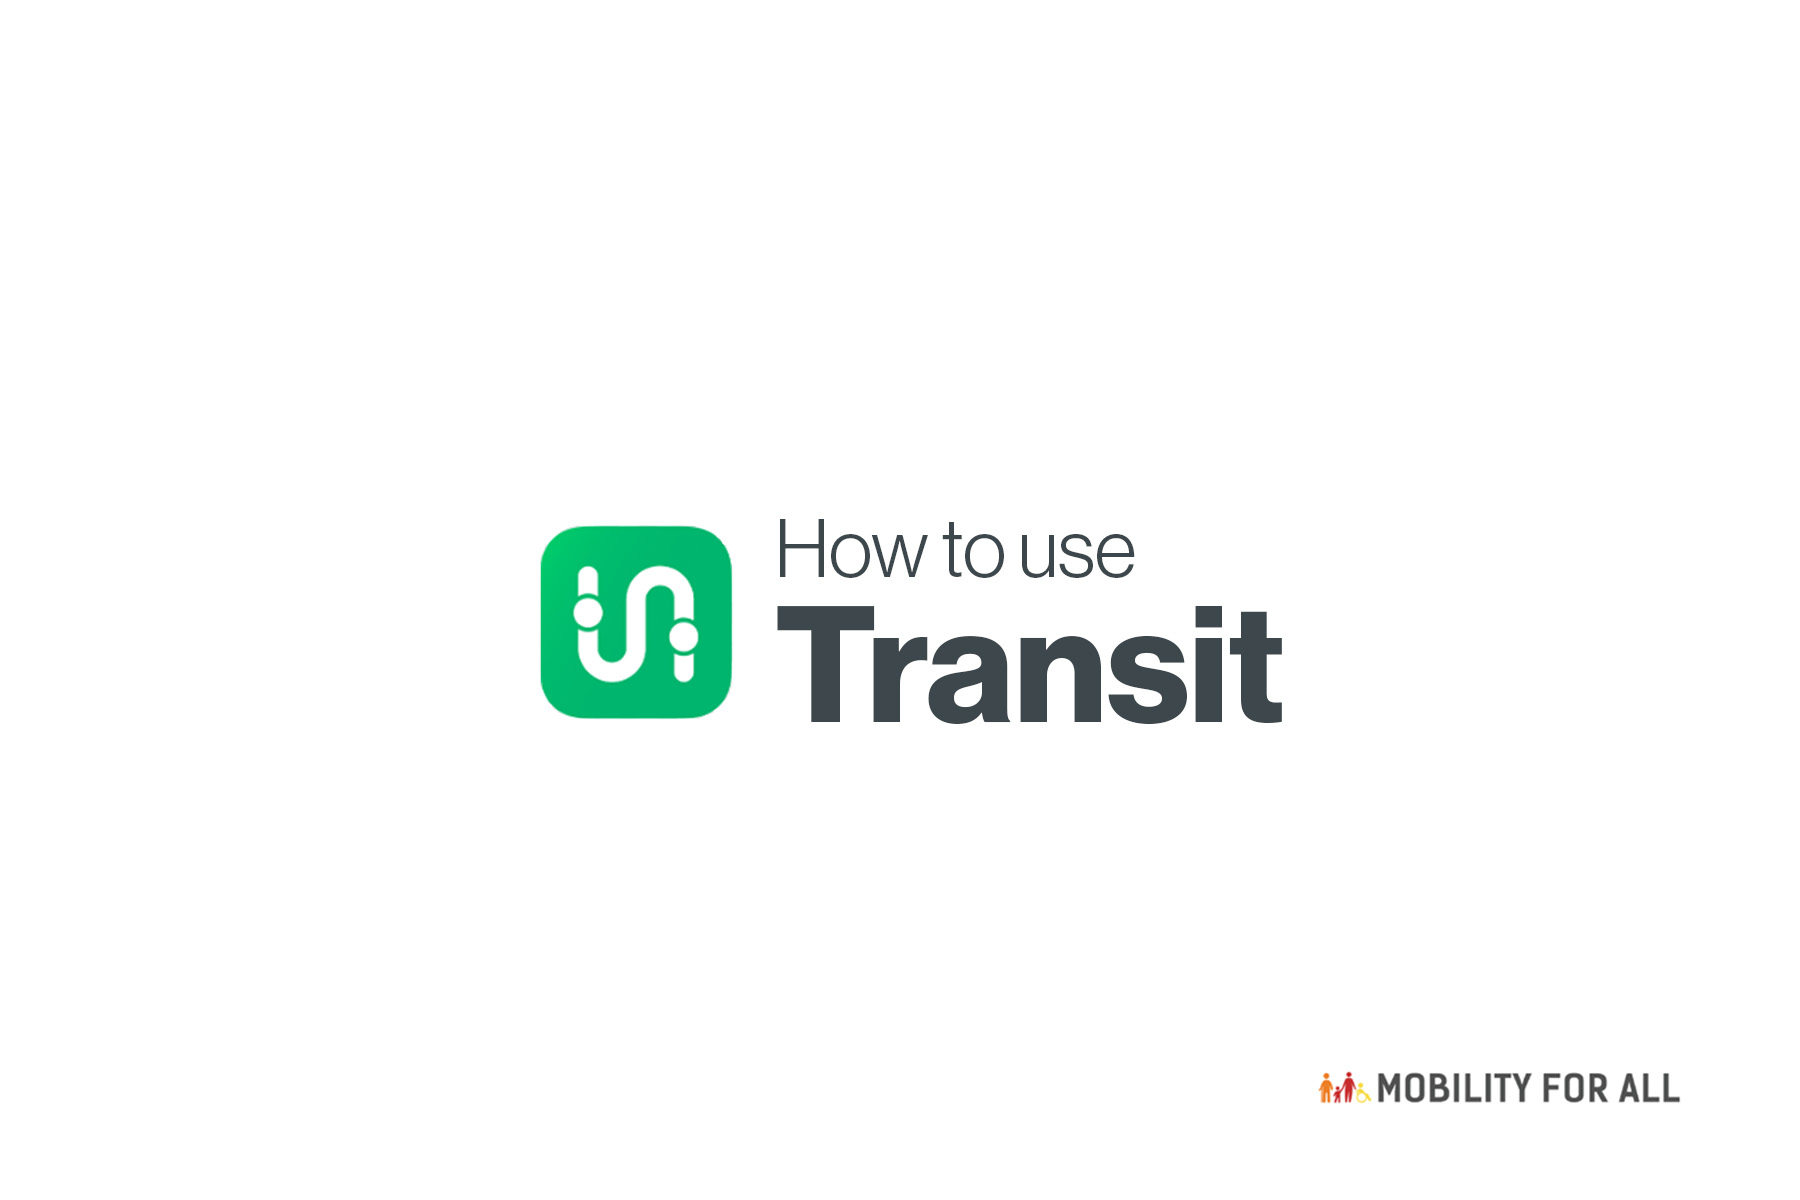 How to use Transit